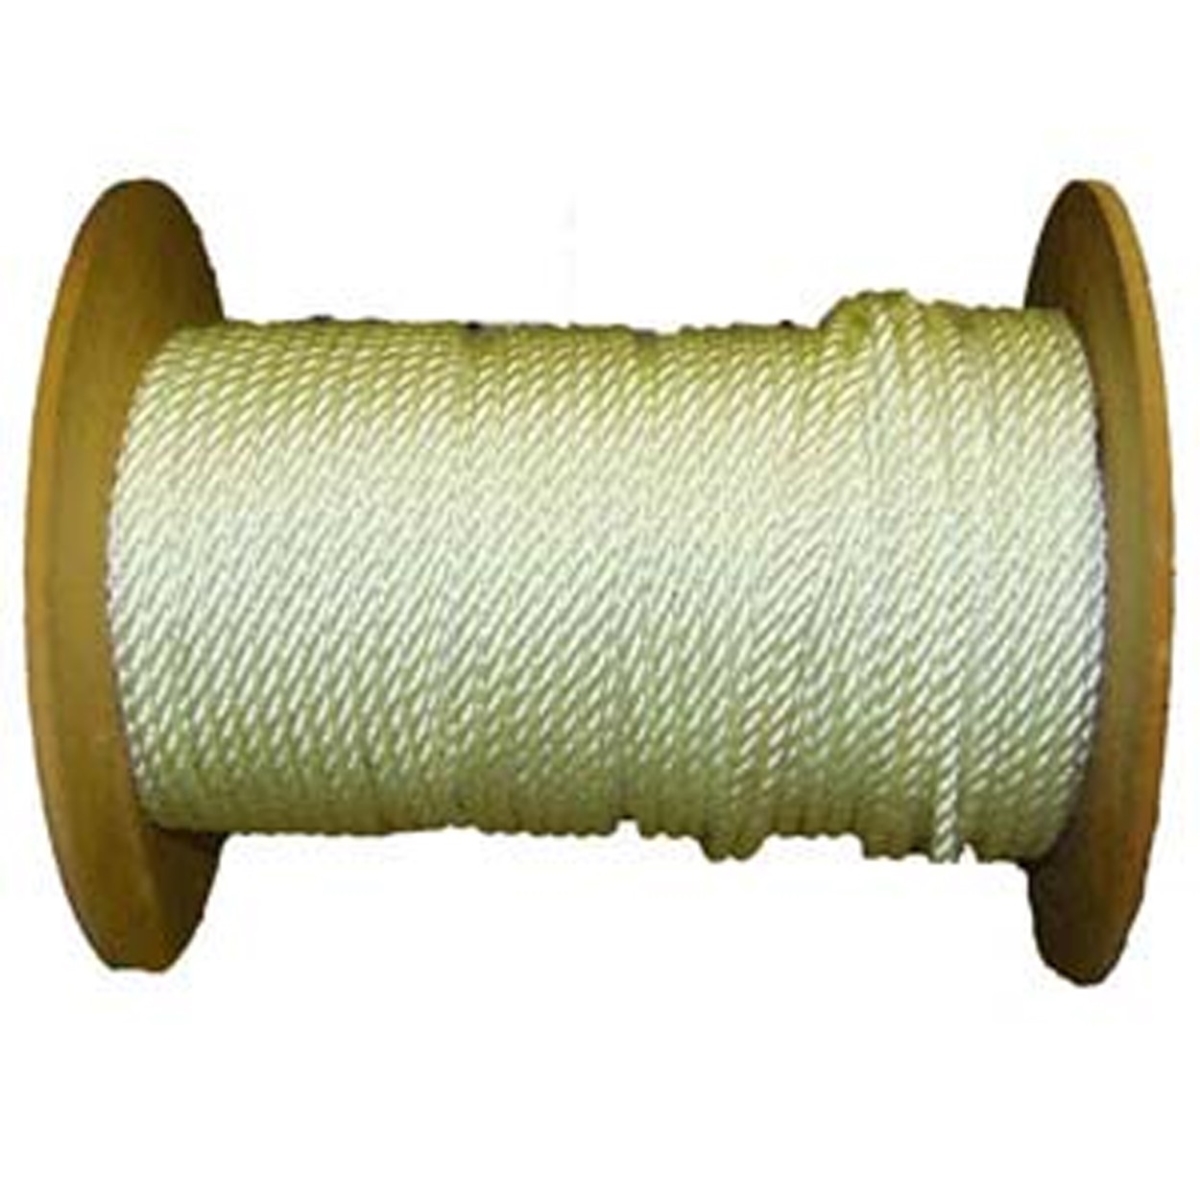 Ny38100msp Solid Braid Nylon Rope Twisted, 0.375 In. X 100 Ft.